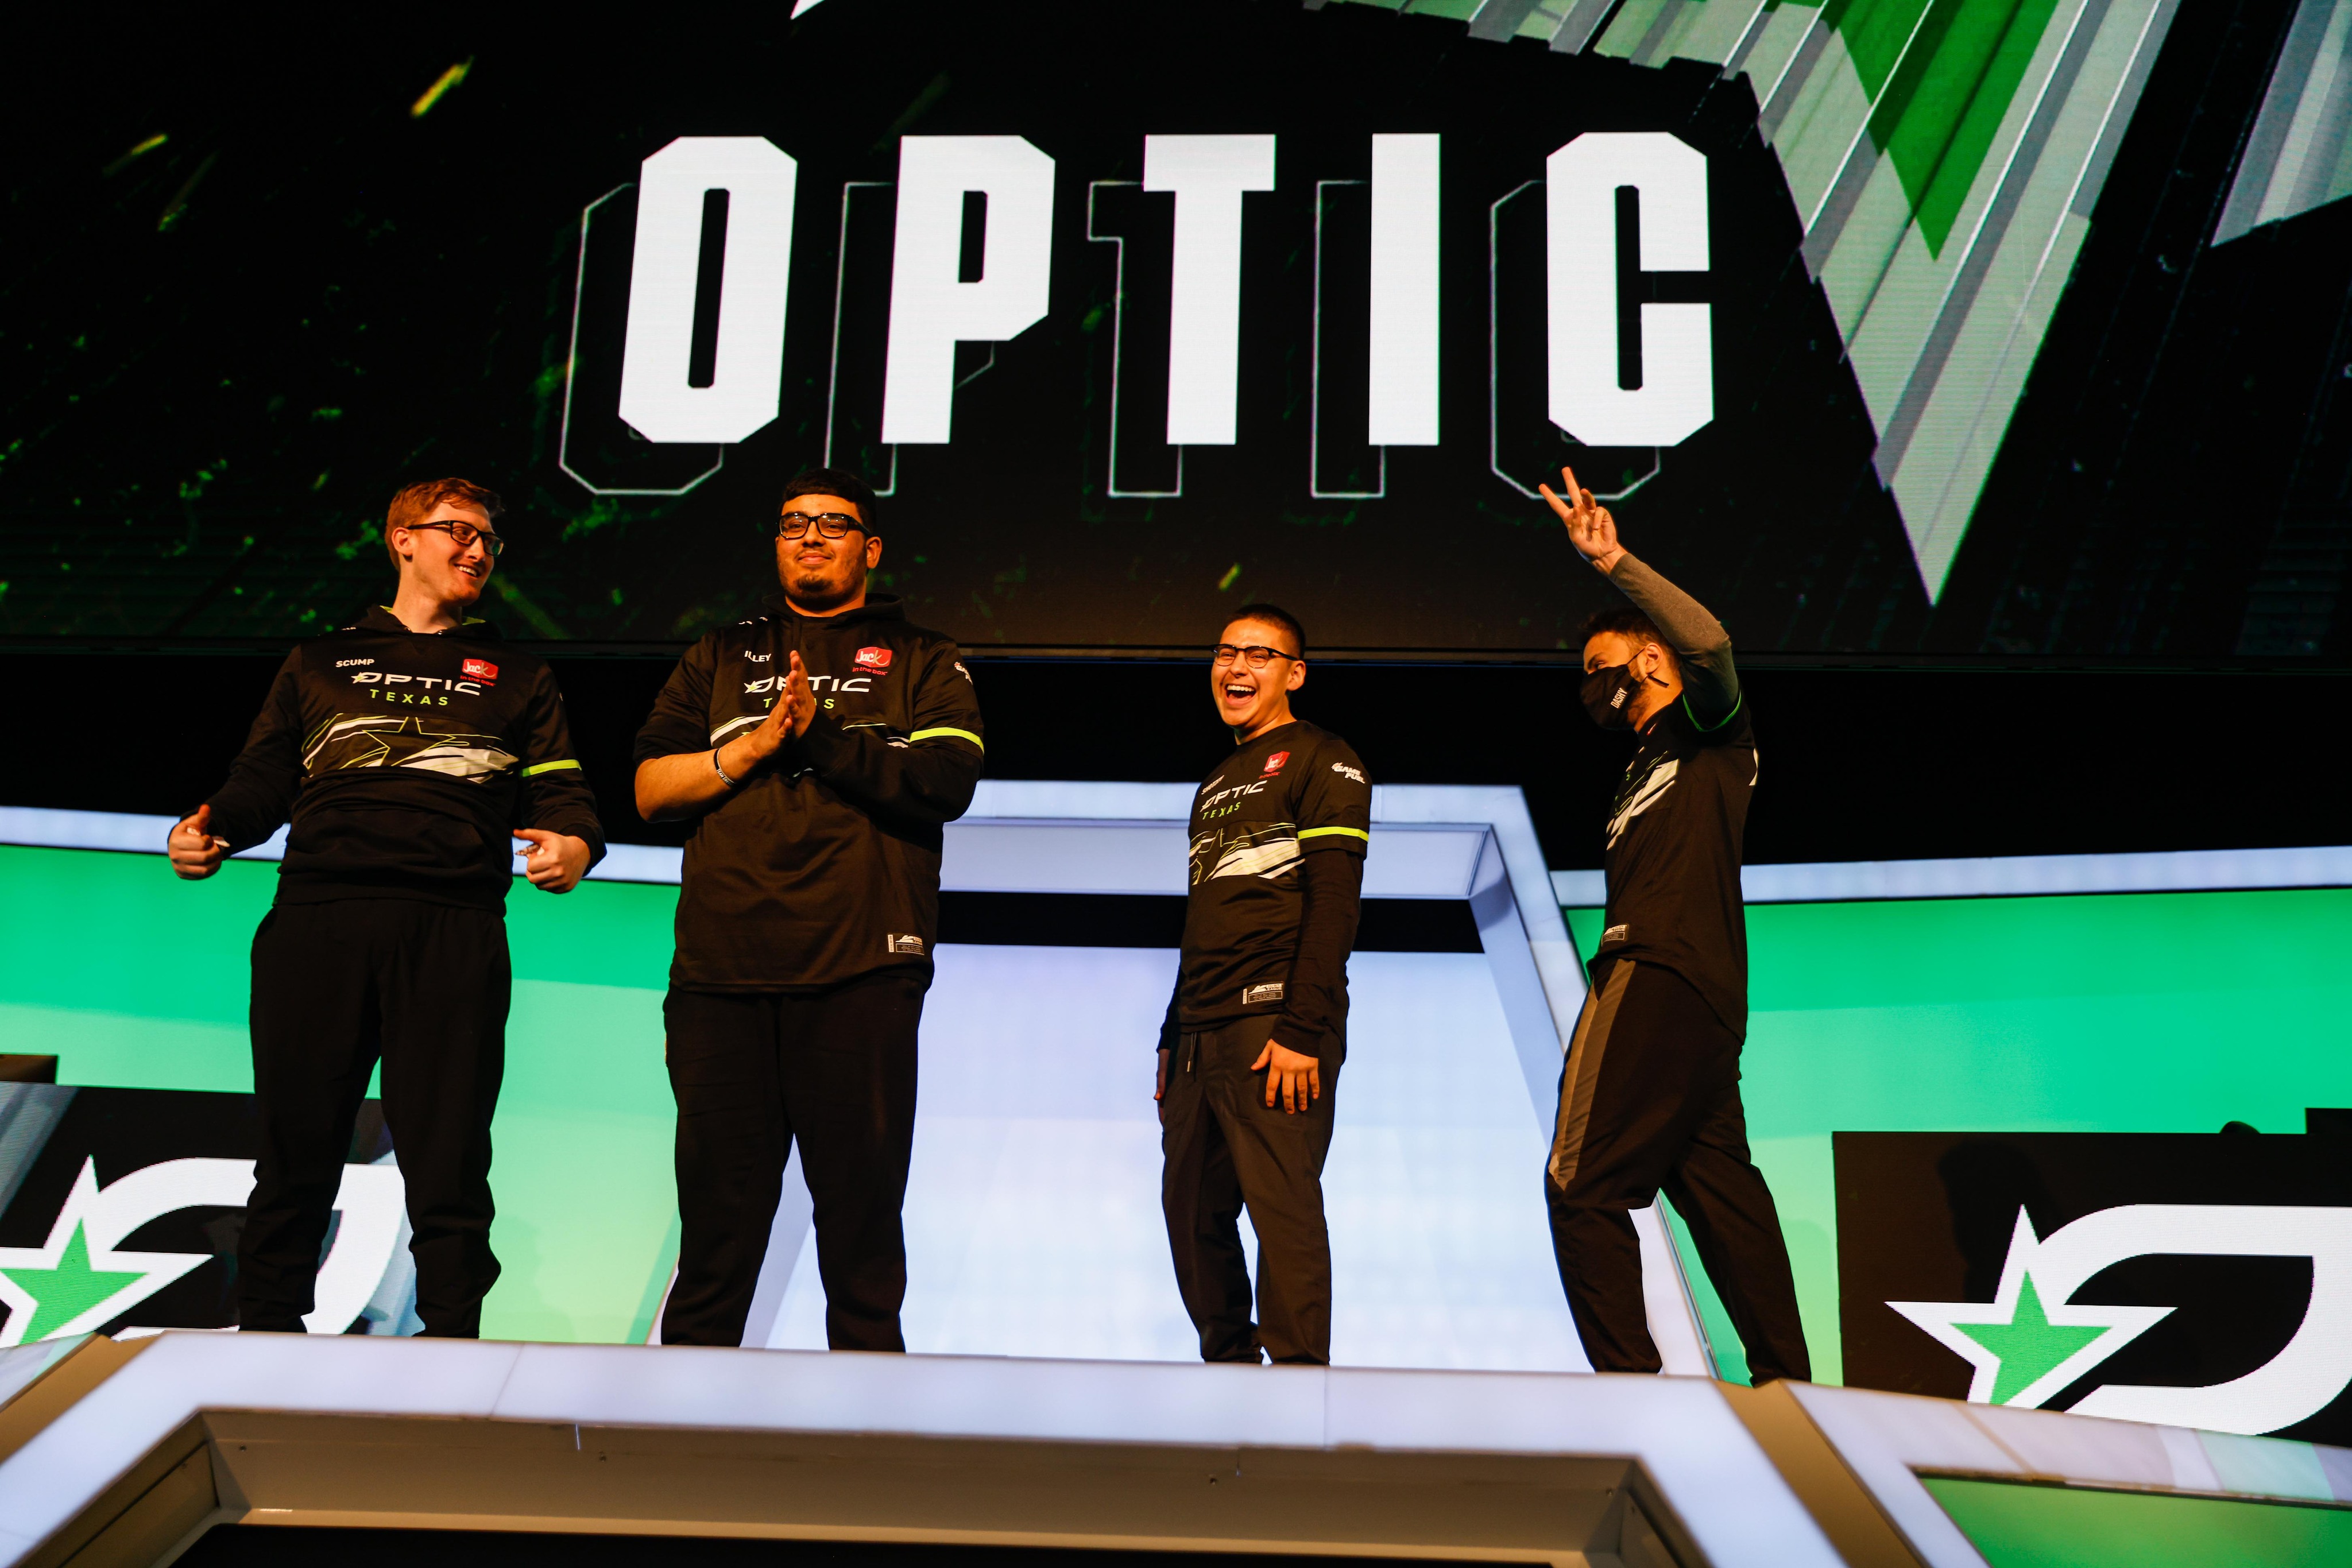 OpTic Texas Ghosty Says to Crowd Keep Comin' Crazy for Champs Sunday -  Esports Illustrated